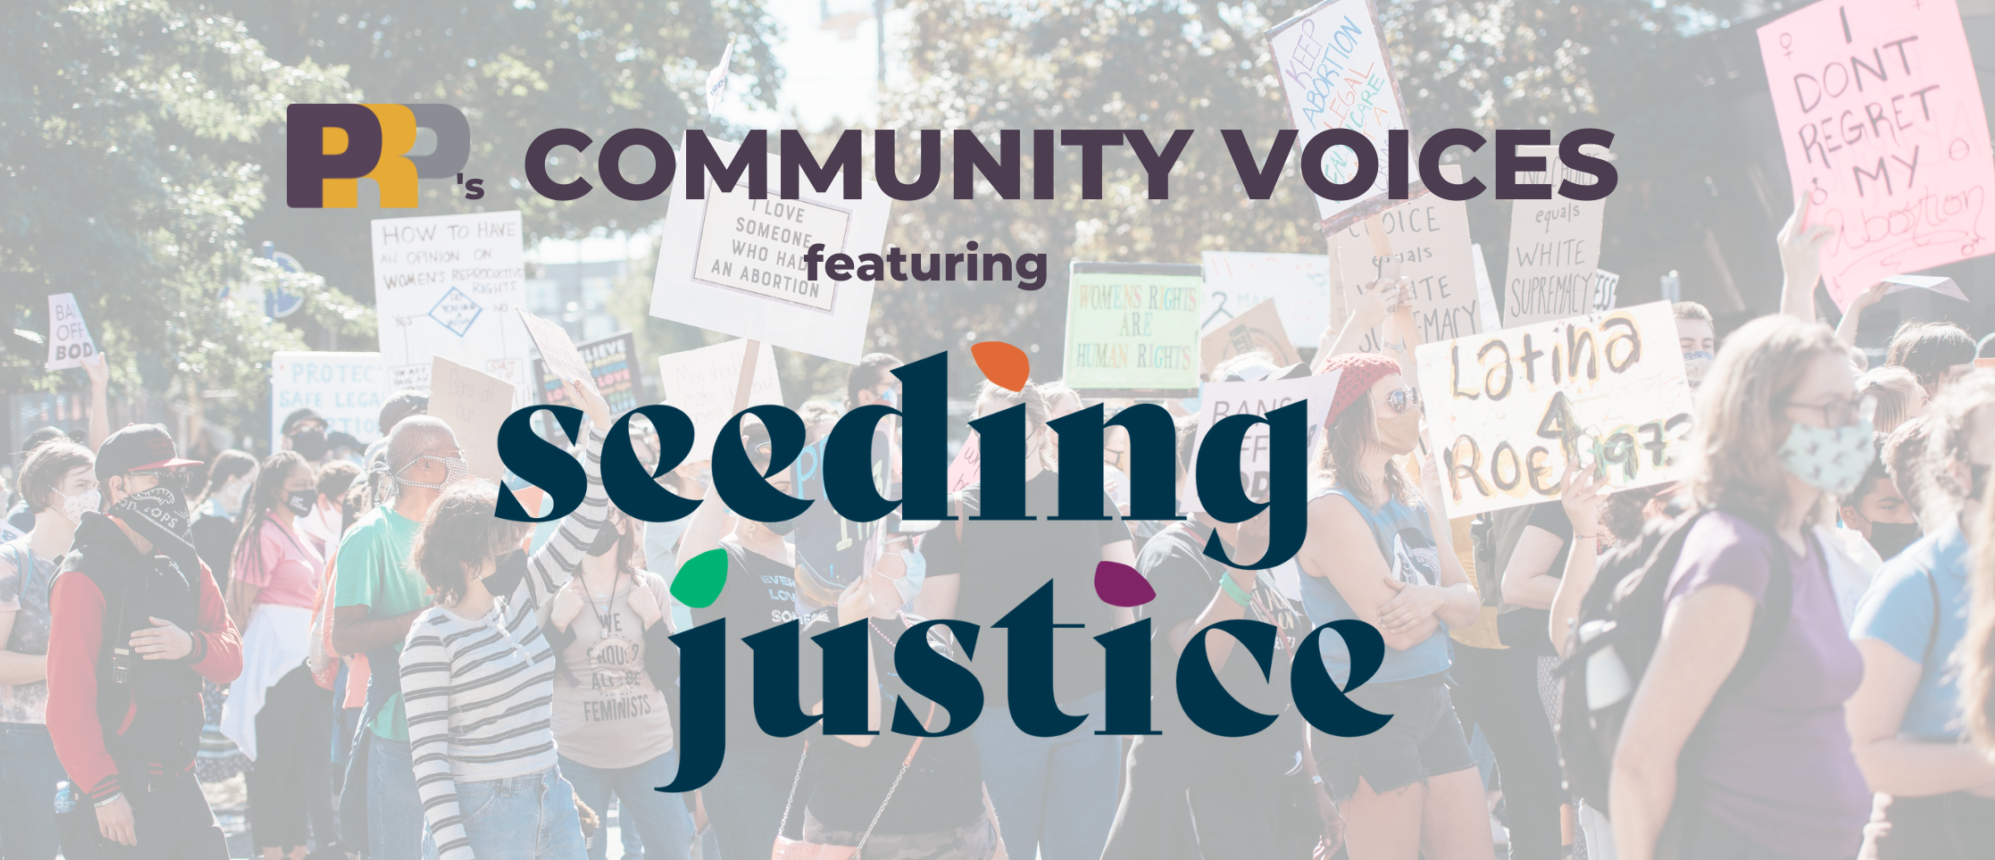 Community Voices:  Seeding Justice